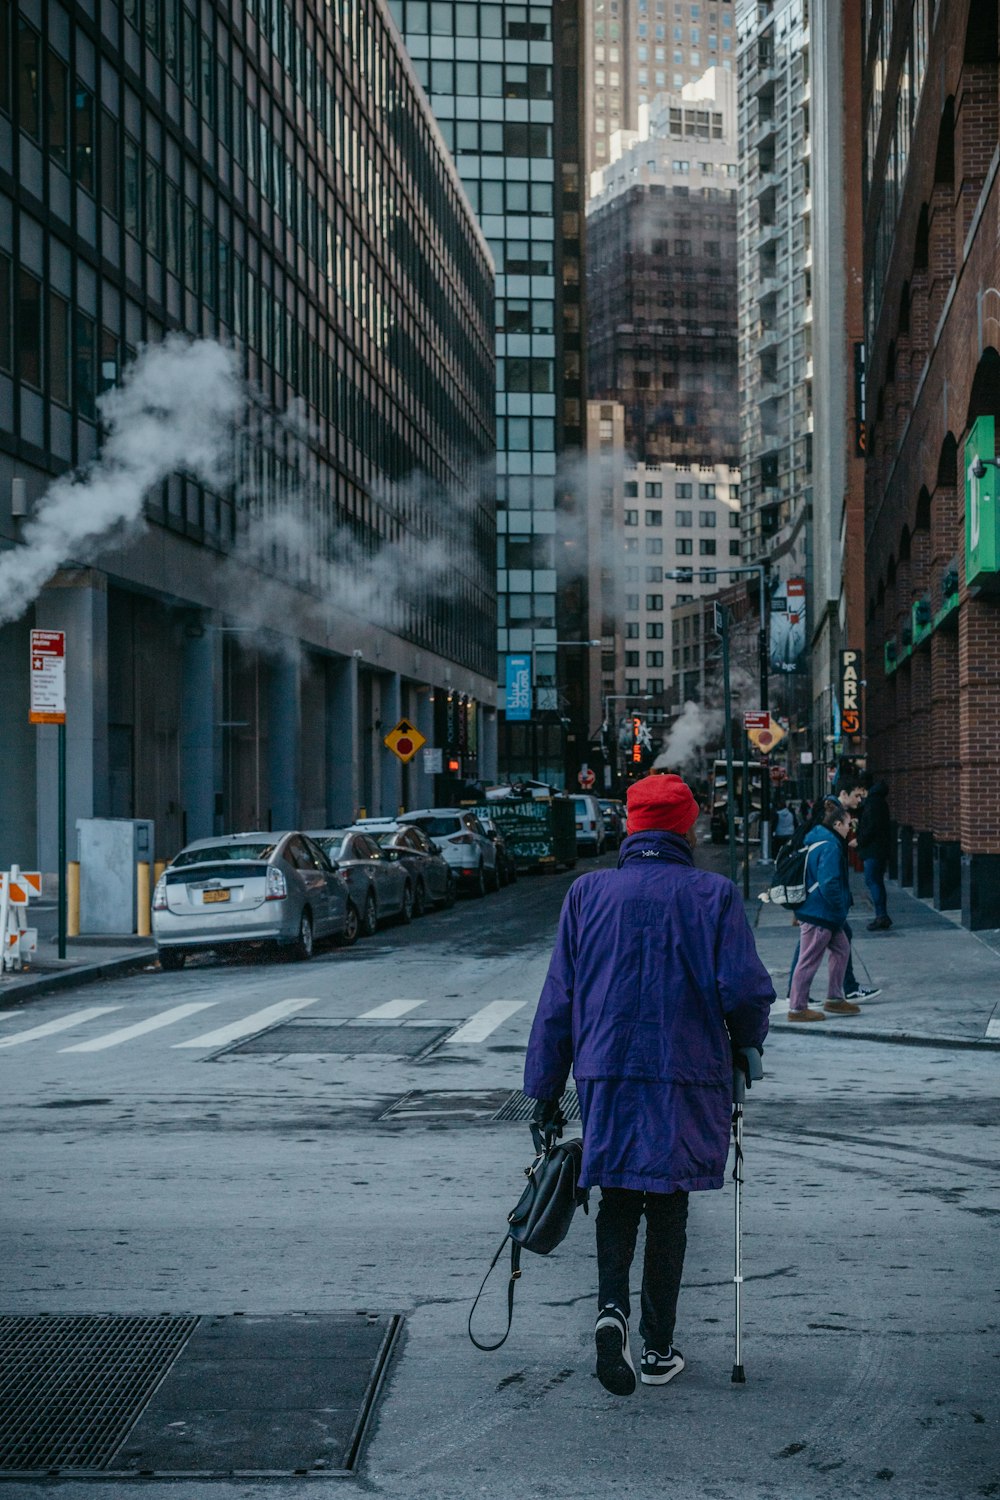 person in blue jacket walking on street with smoke